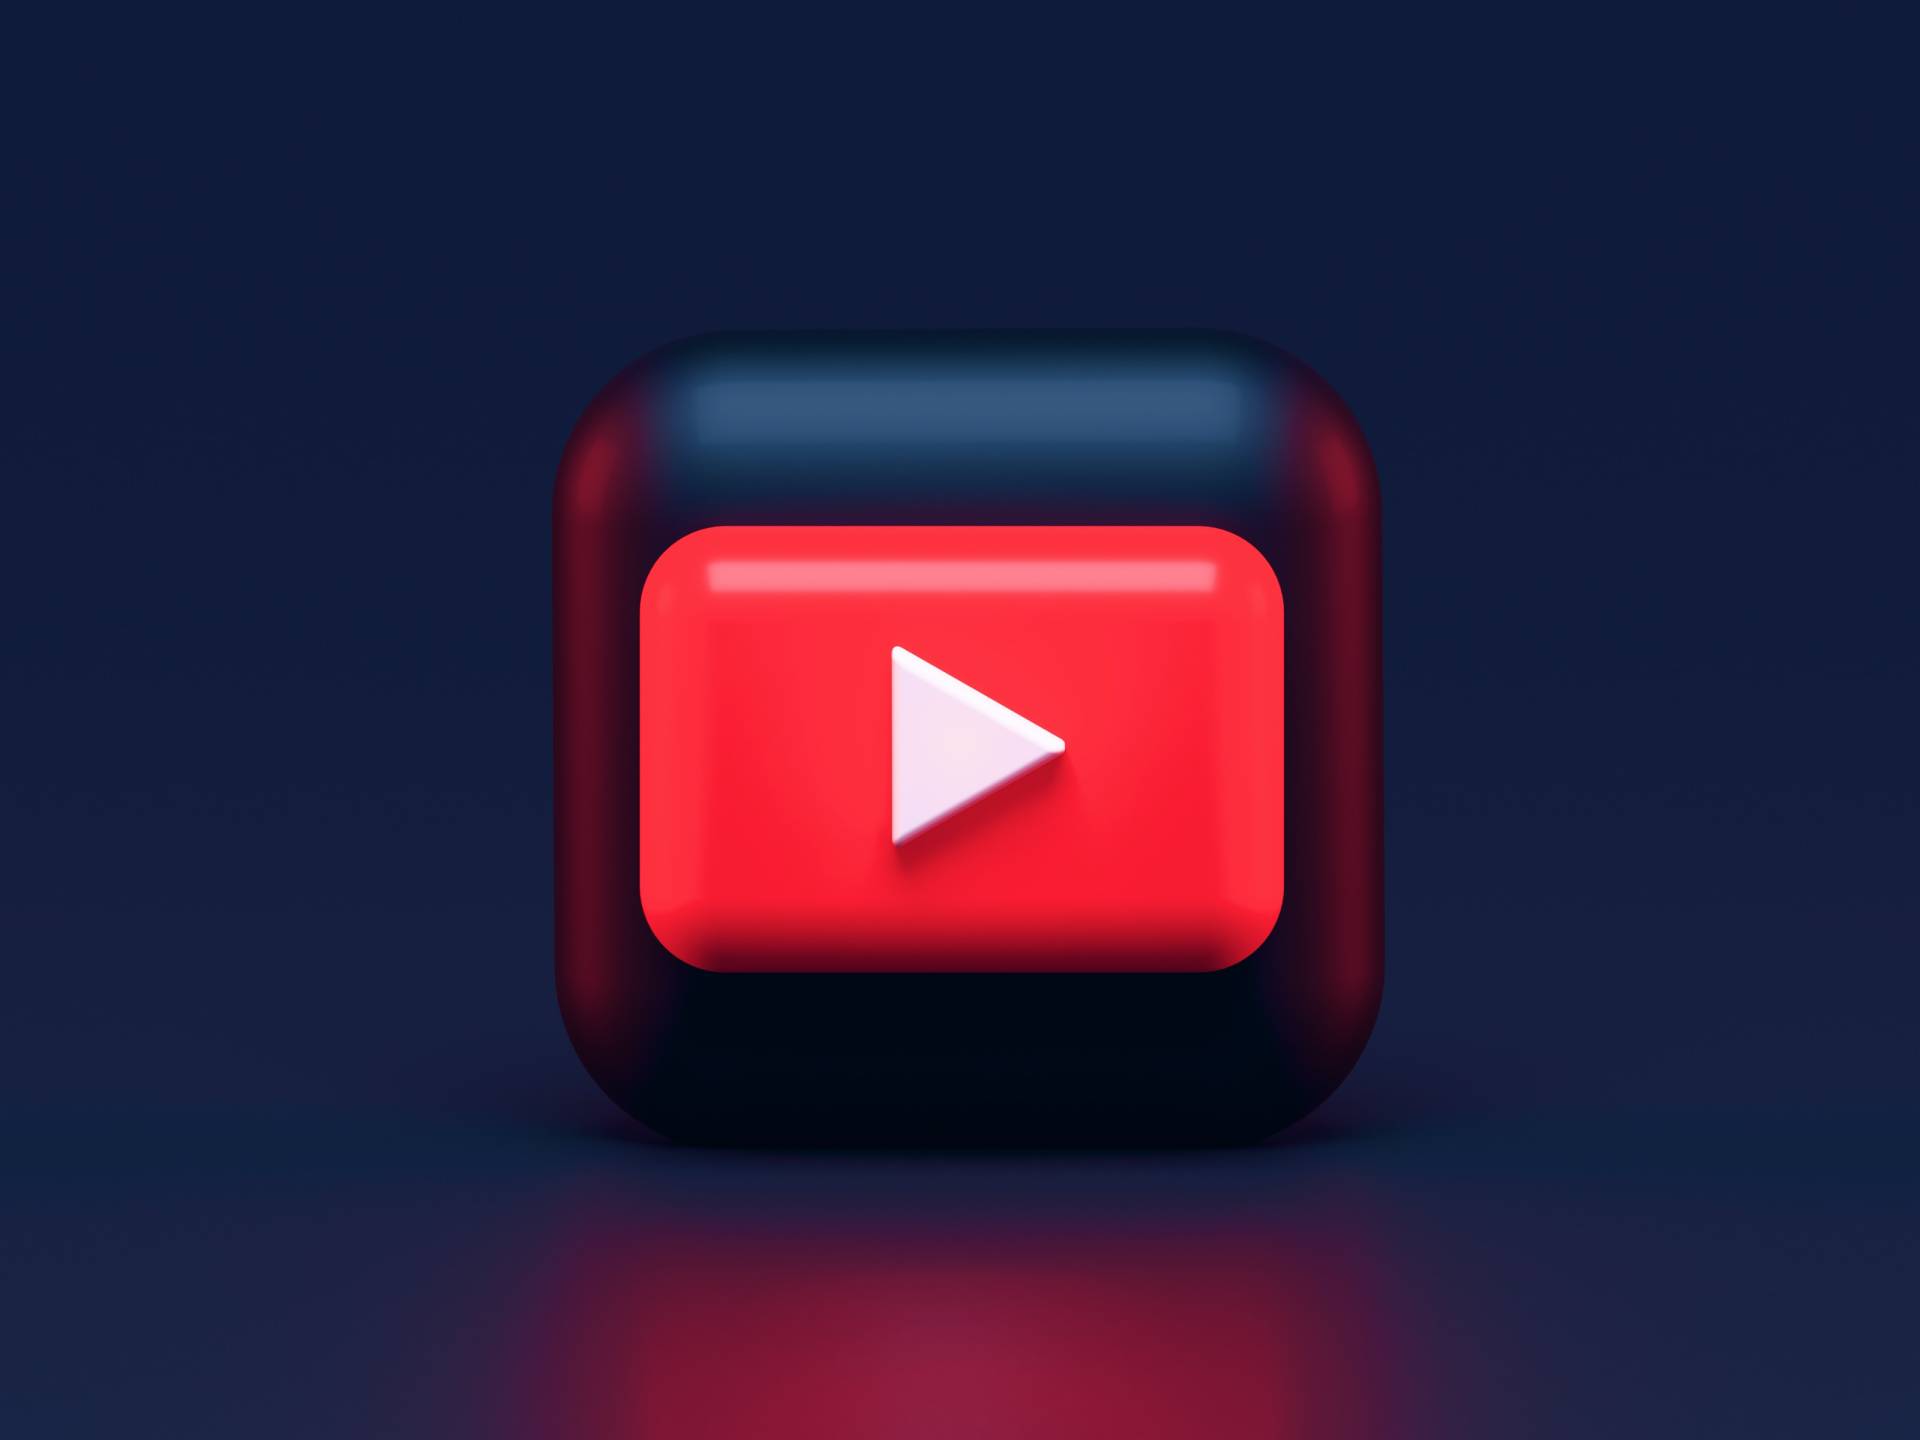 YouTube’s Bold Move: New Experiment Aims to Curb Ad Blocker Usage - readwrite.com